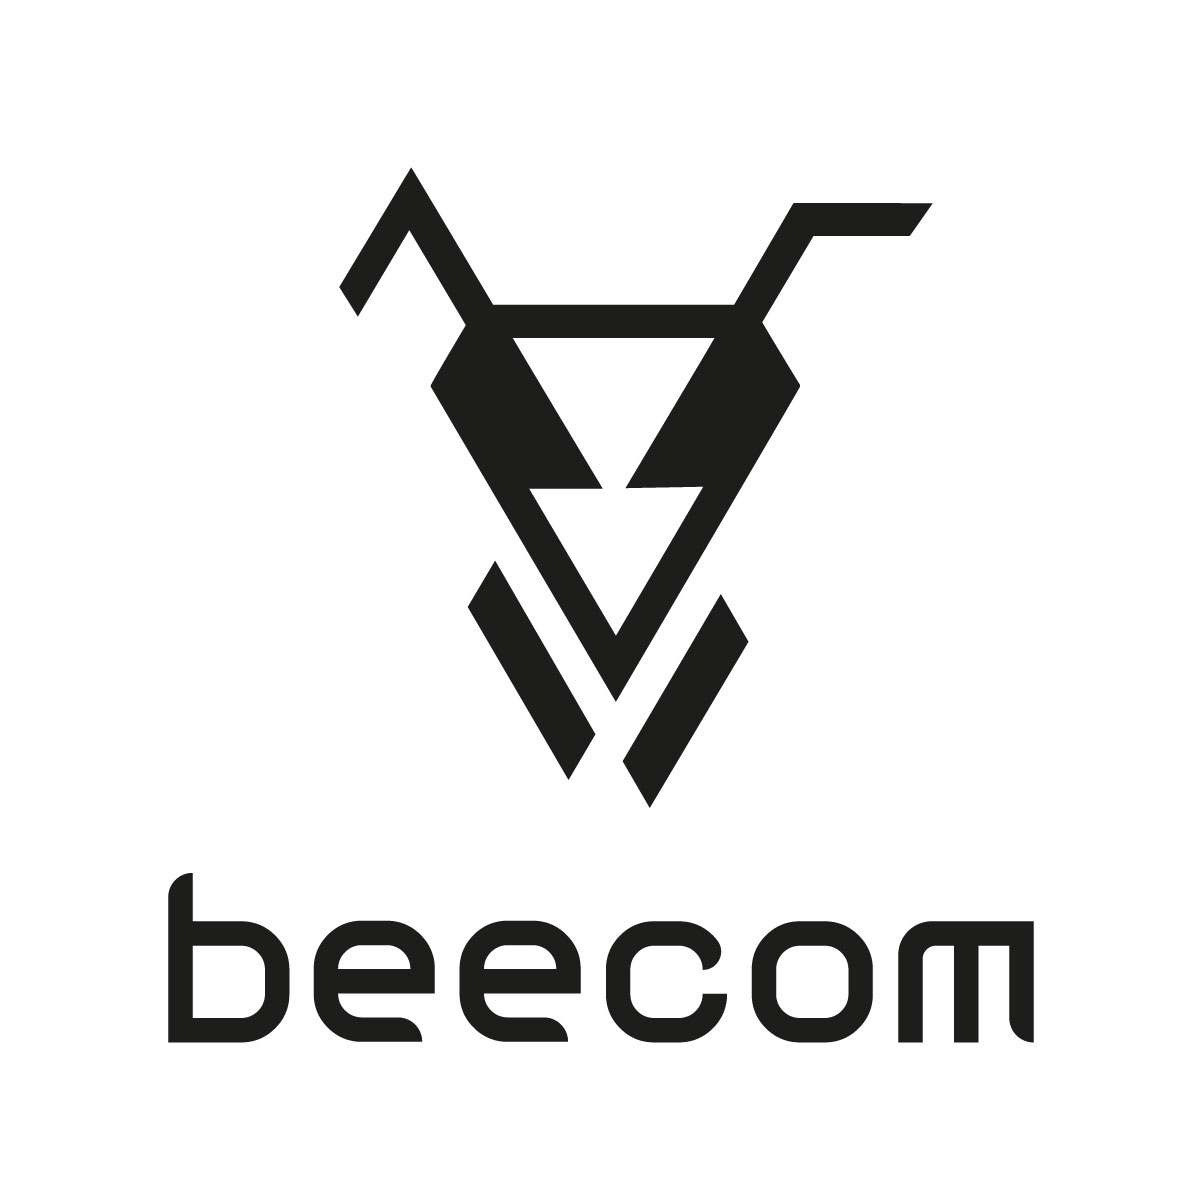 BEECOM PRODUCTS AG